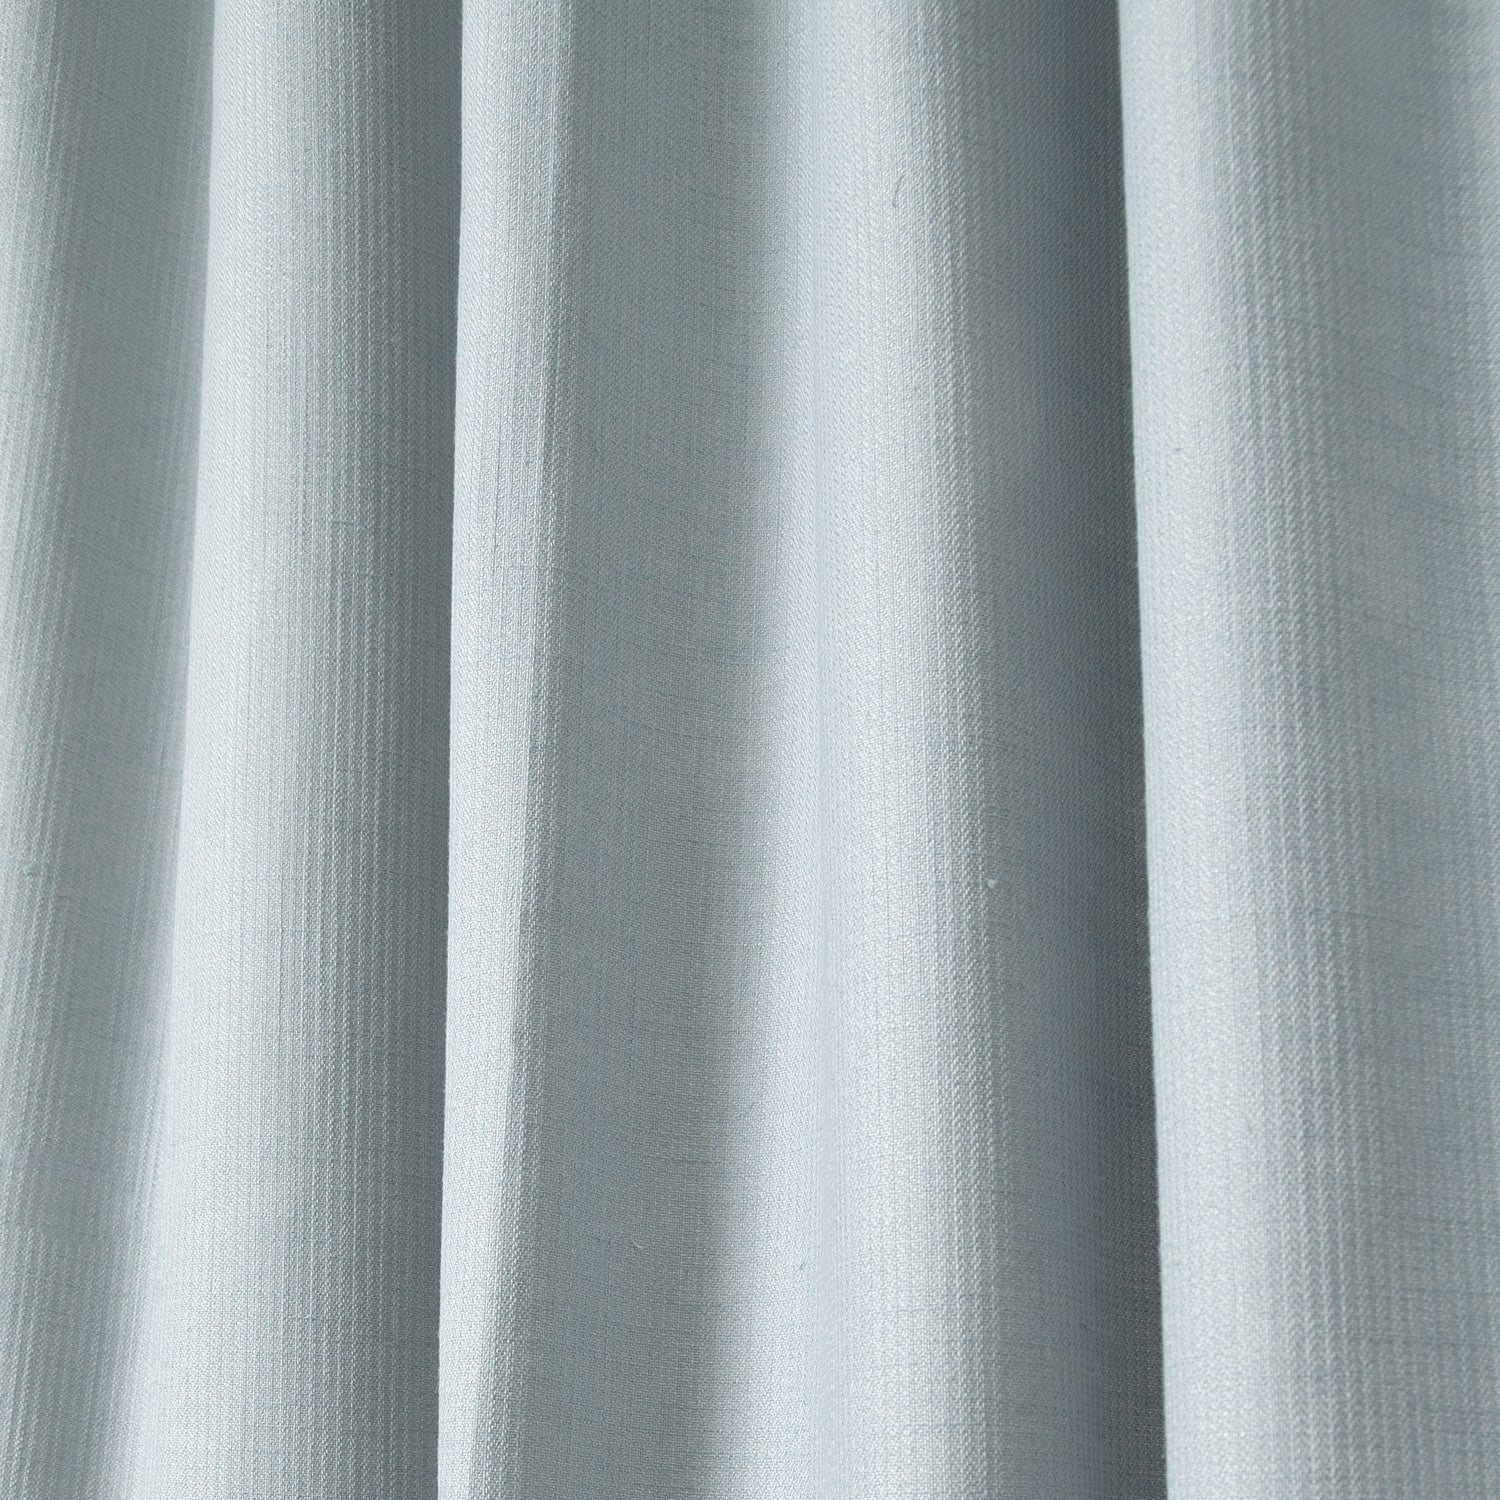 close up of grey blue shower curtain